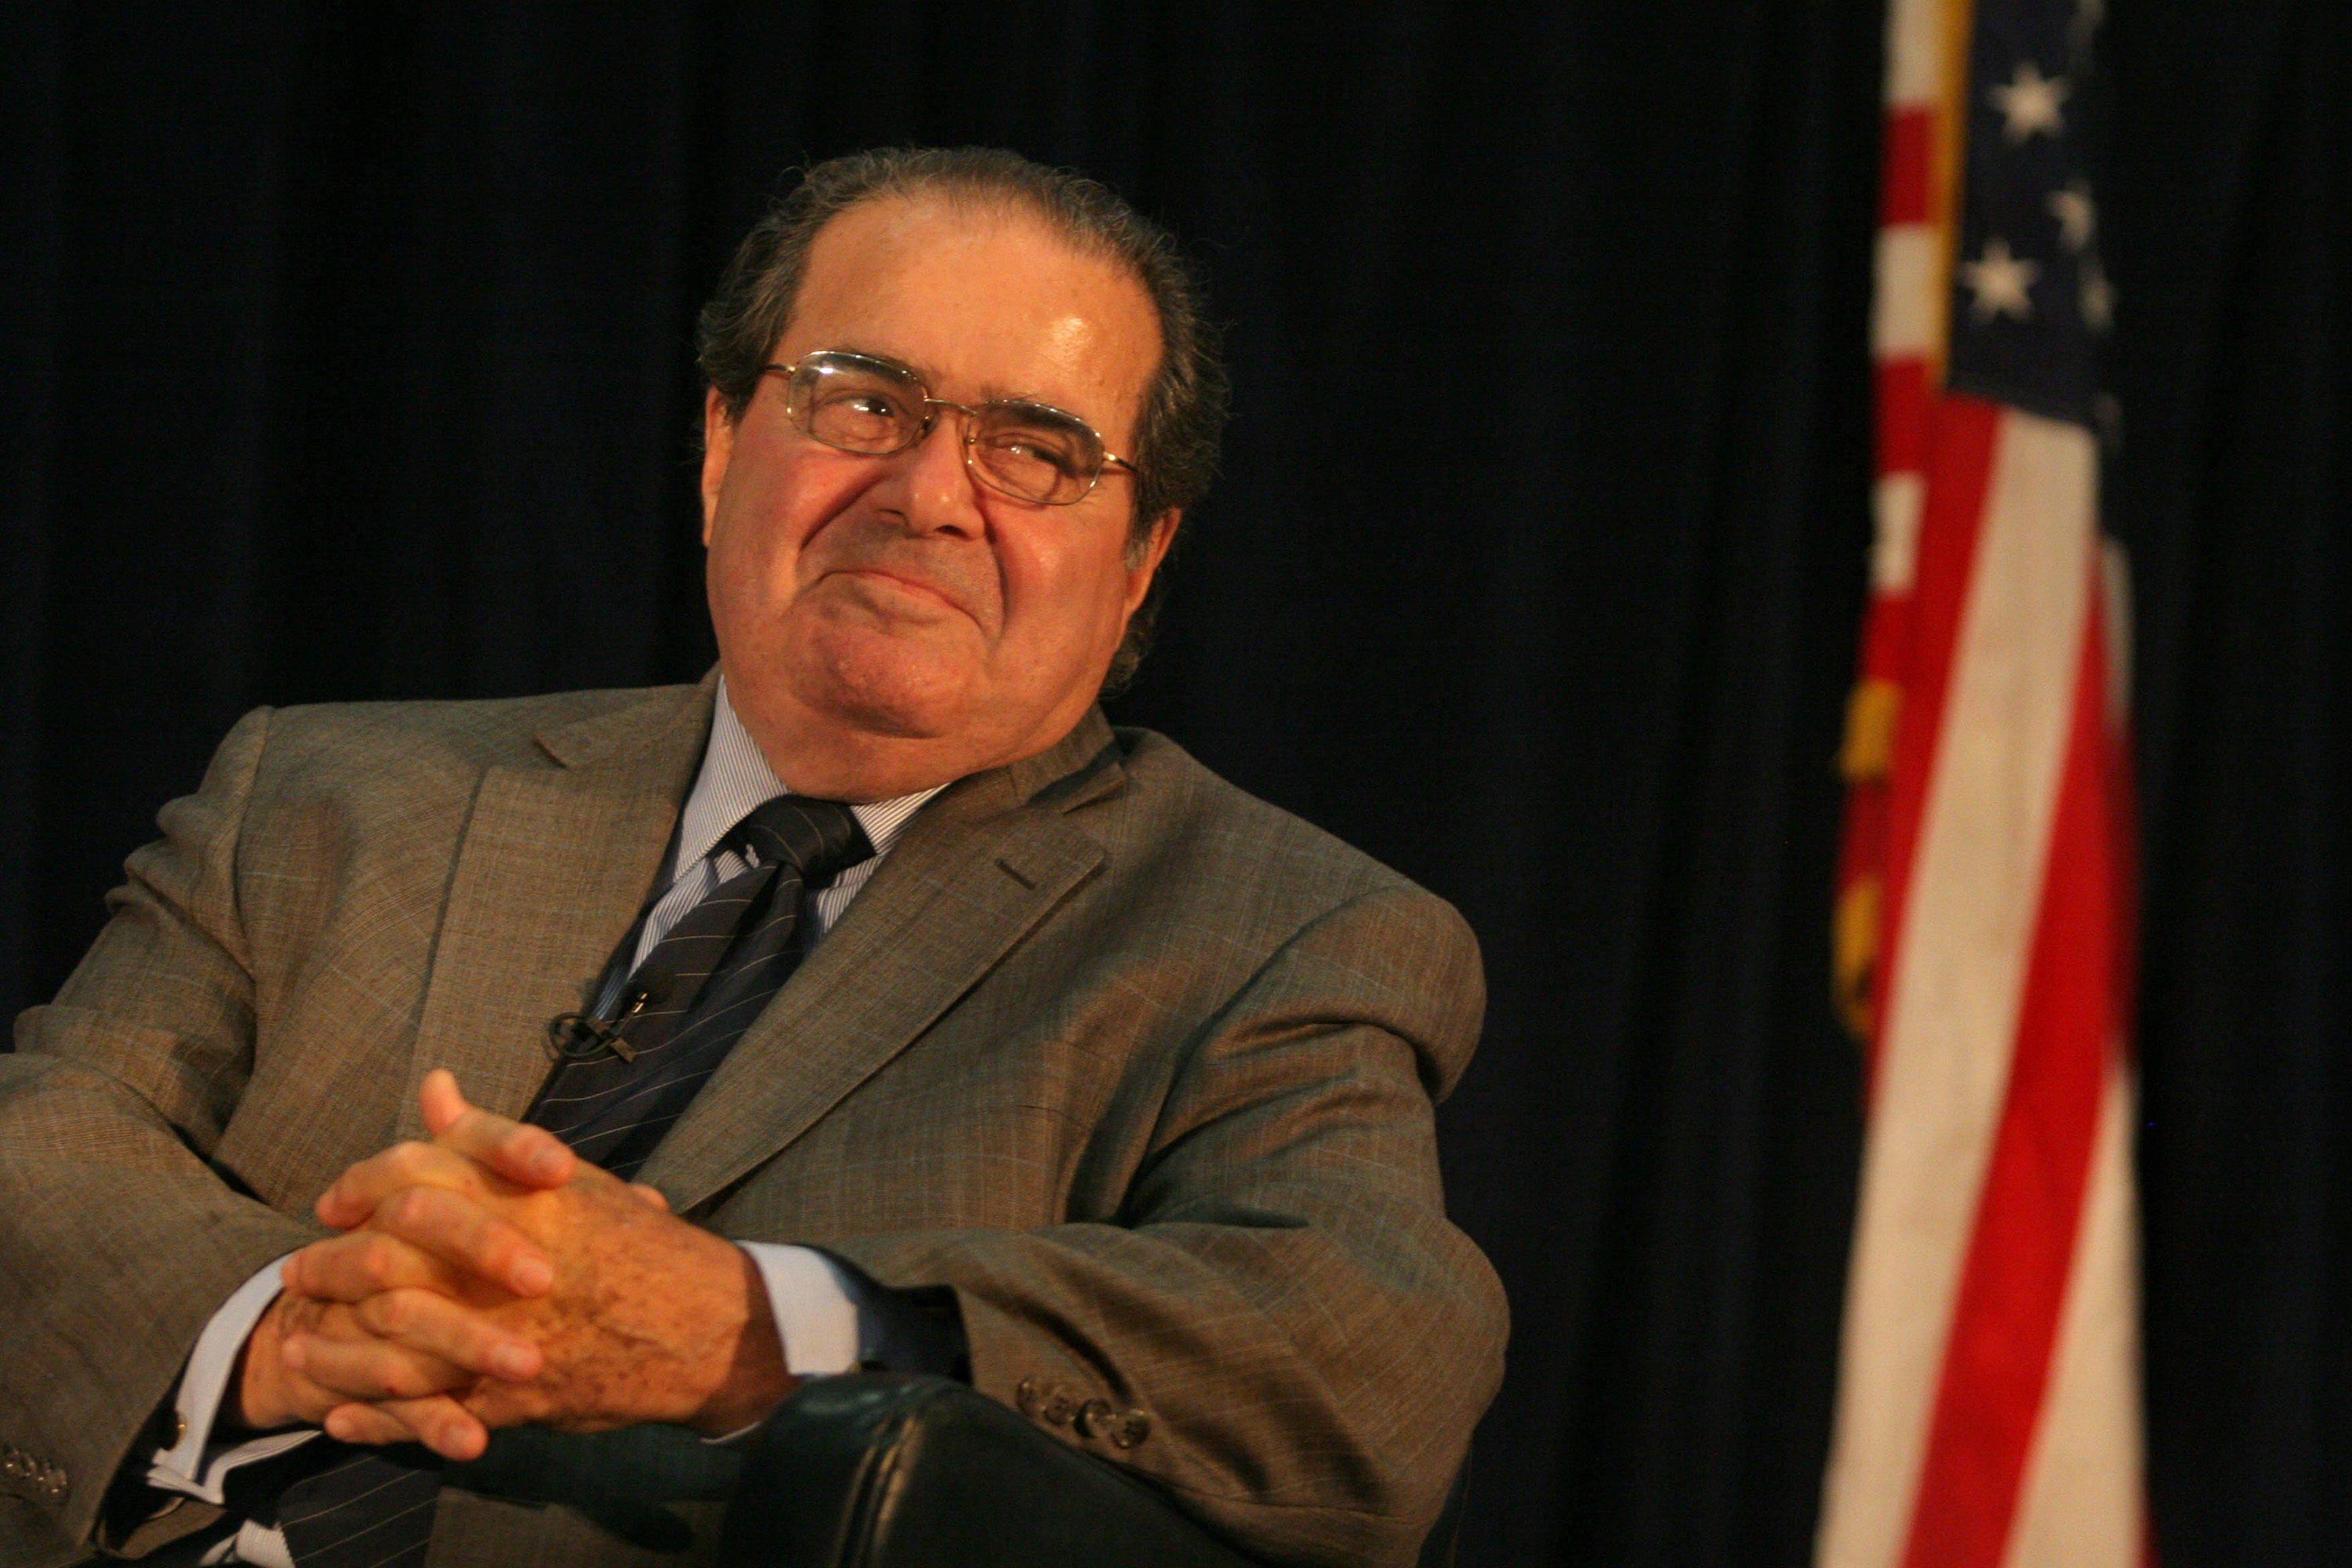 Supreme Court Justice Antonin Scalia in a September 2010 file image at the University of California, Hastings. (Ray Chavez/Bay Area News Group&mdash;TNS/Getty Images)